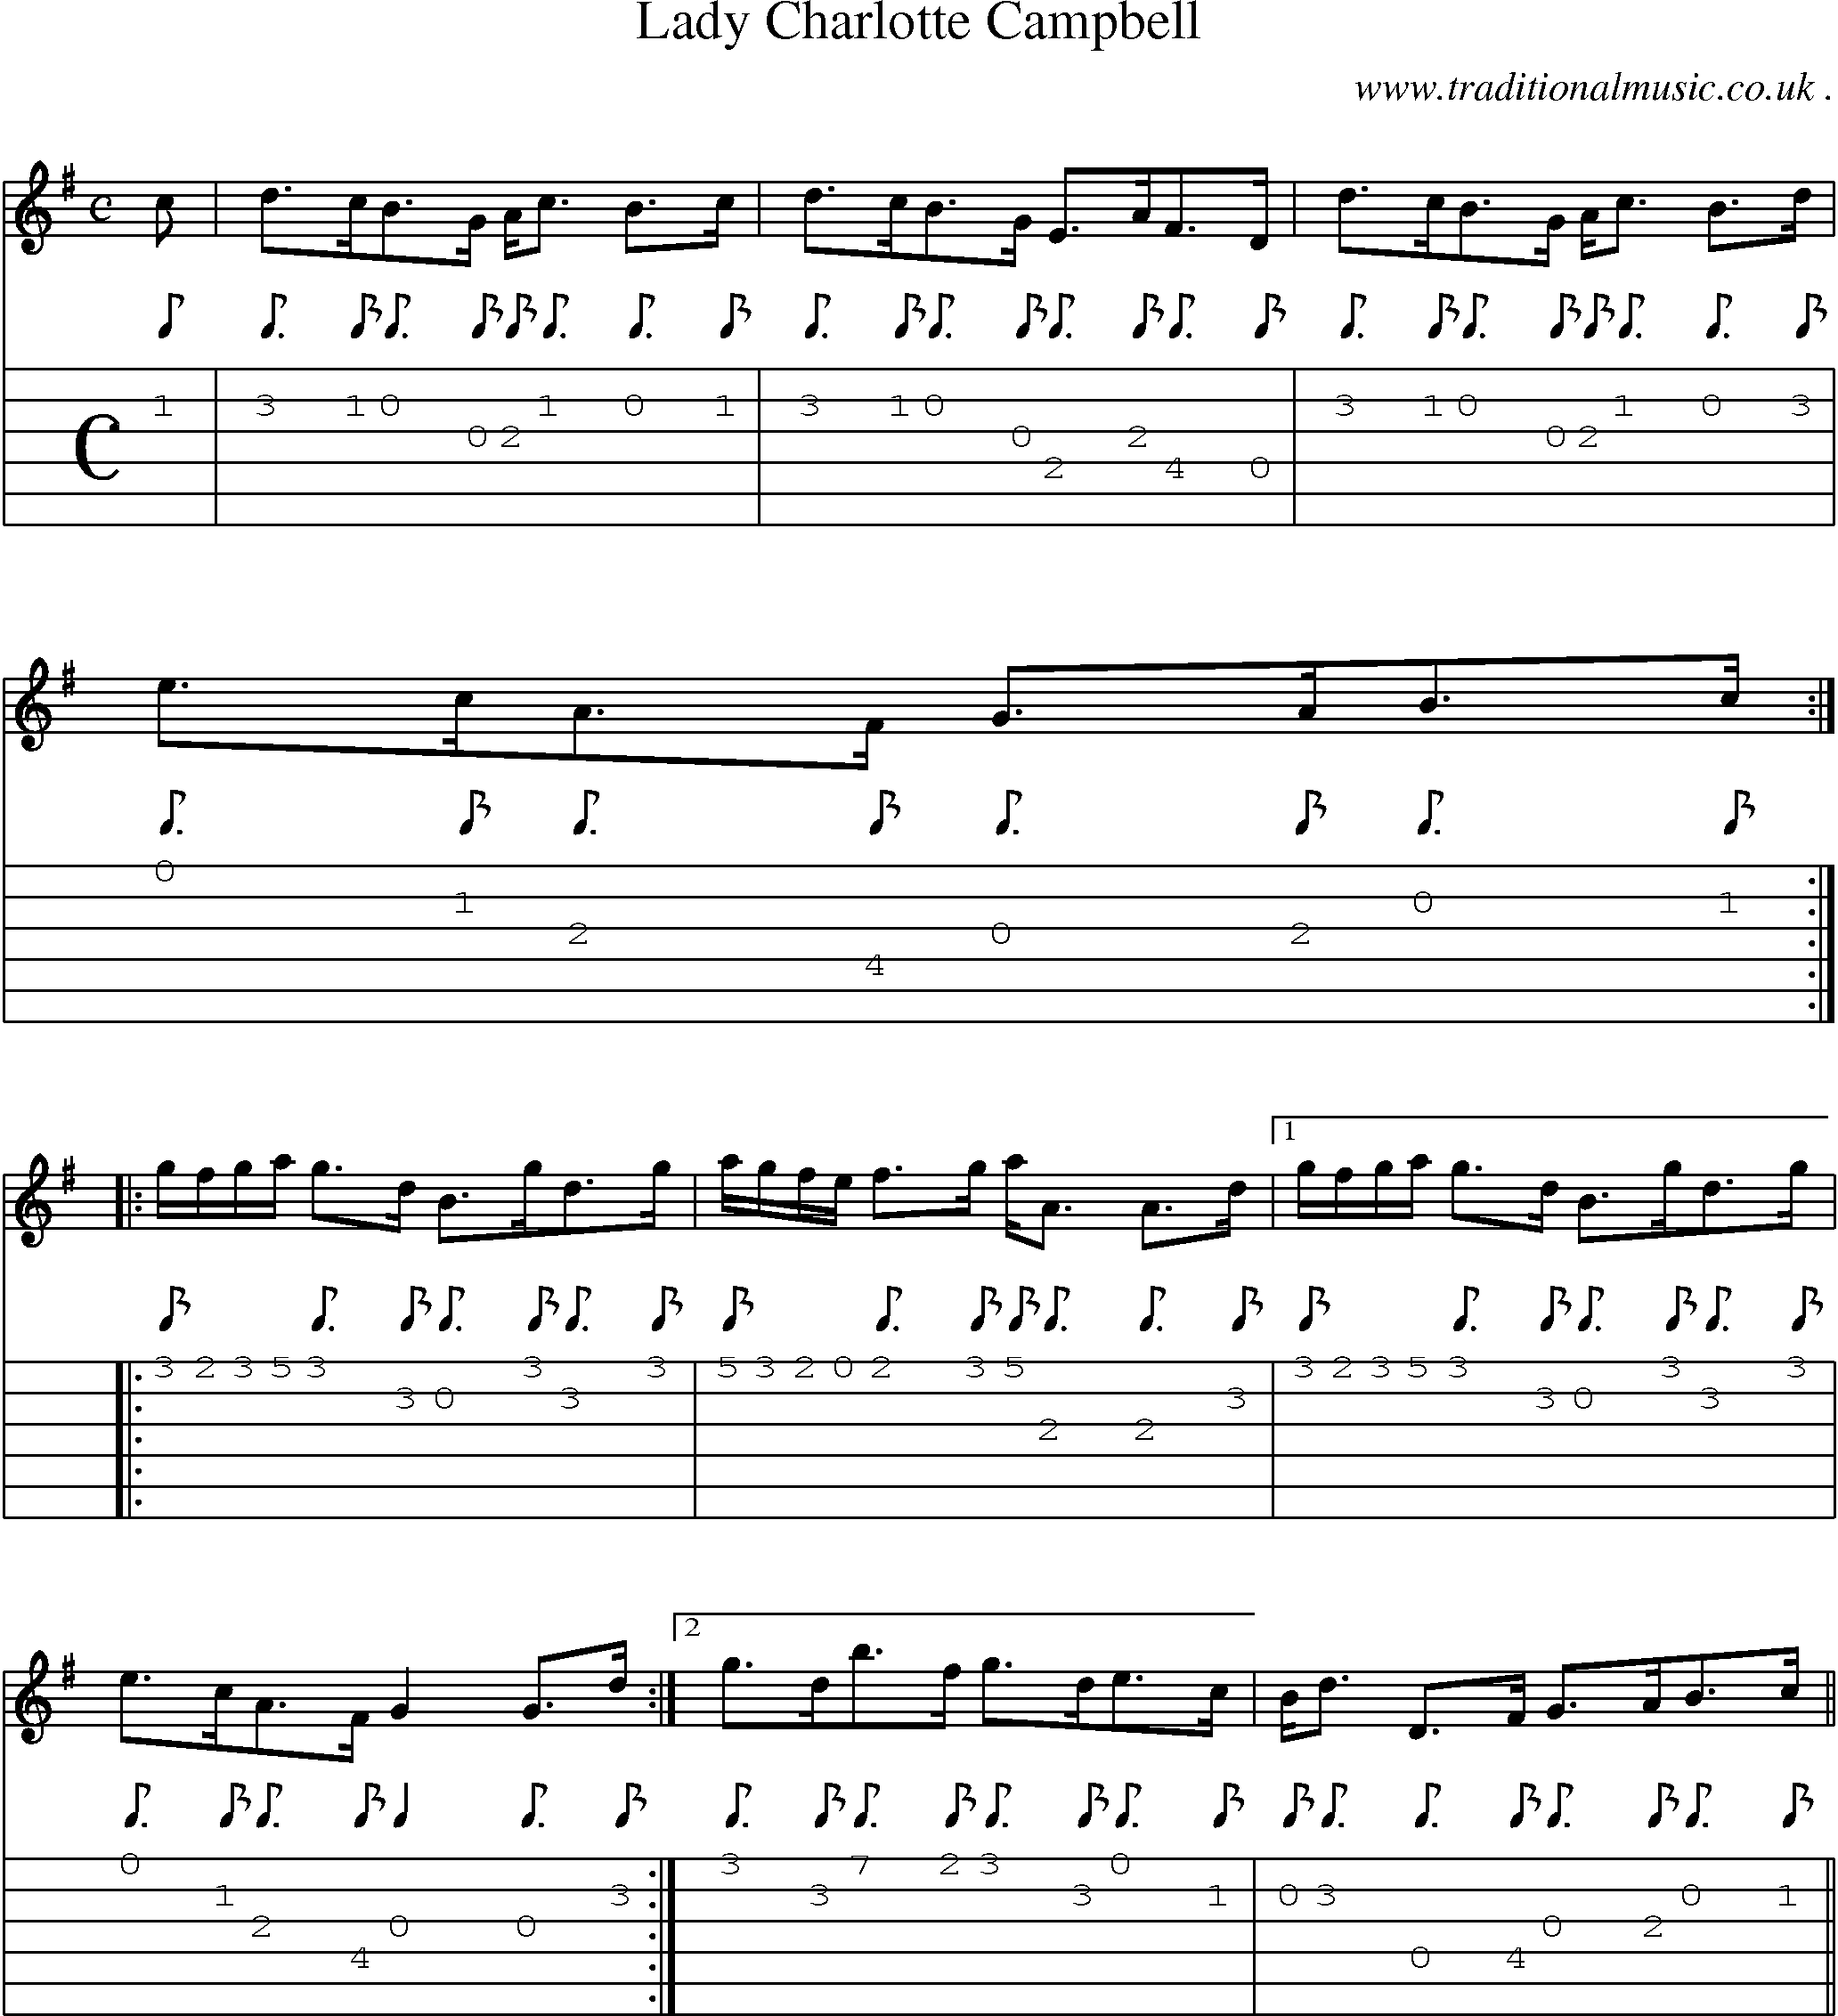 Sheet-music  score, Chords and Guitar Tabs for Lady Charlotte Campbell 